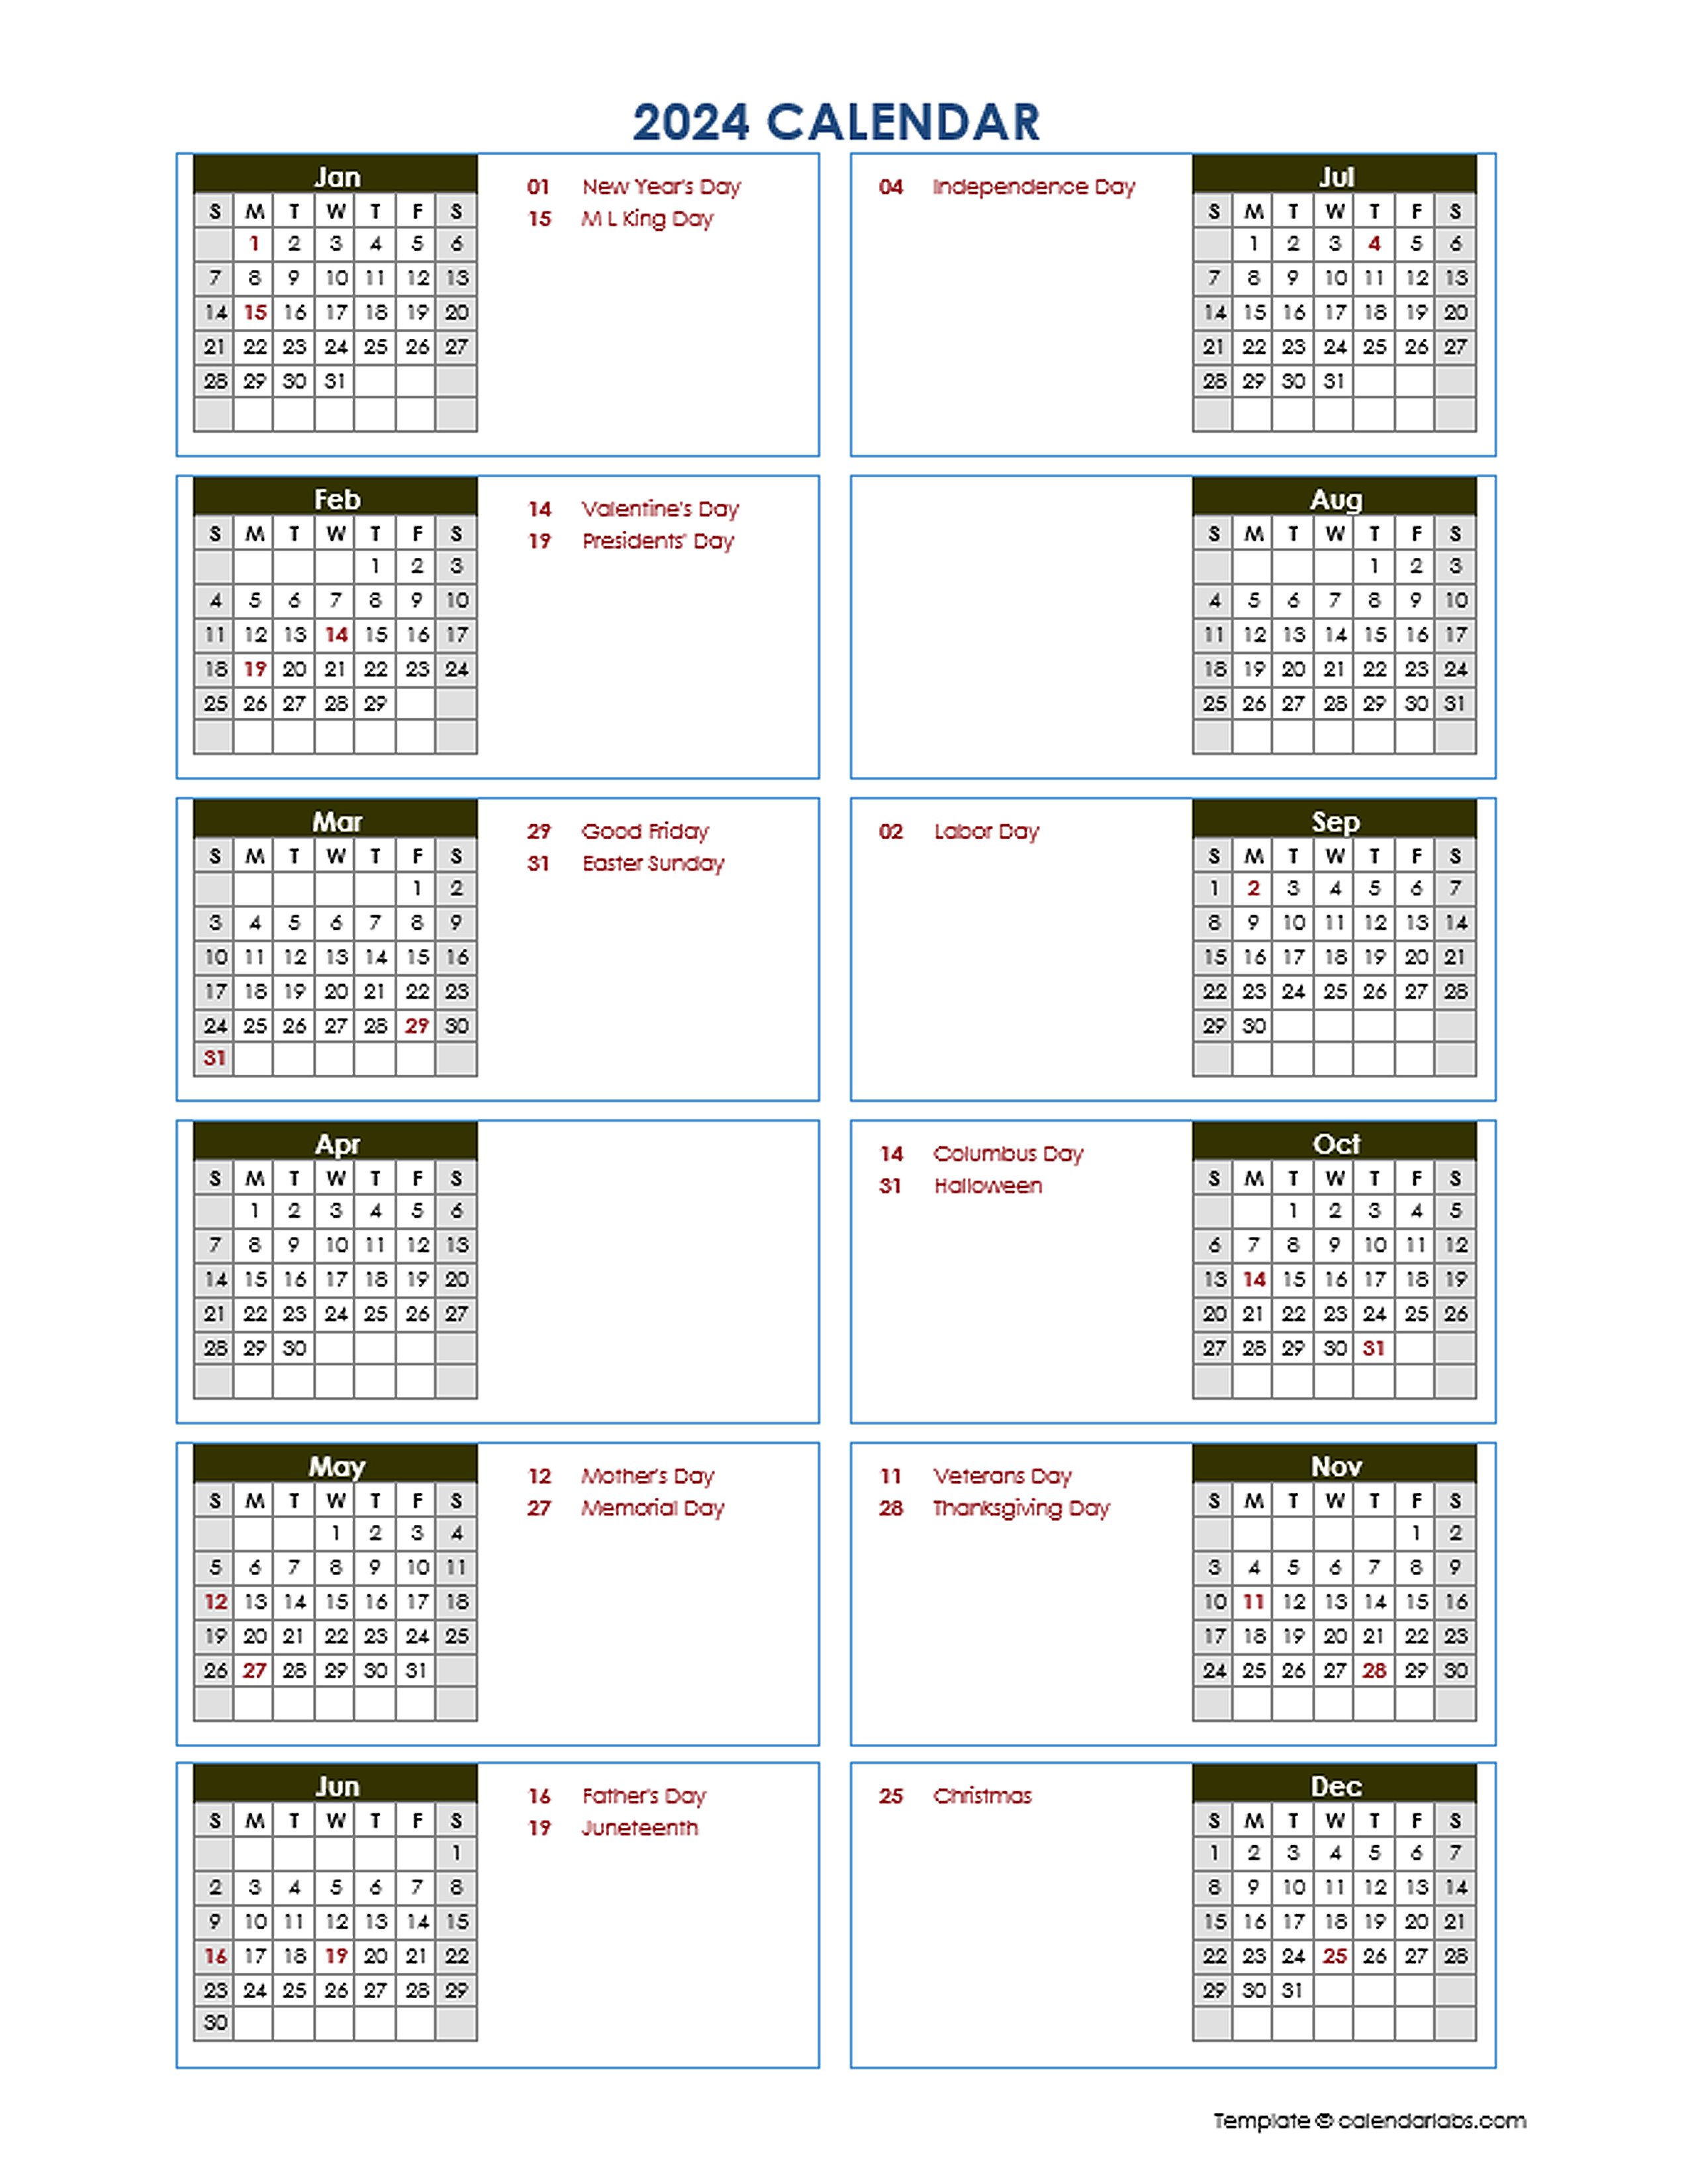 2024 Yearly Calendar Template Vertical Design Free Printable Templates